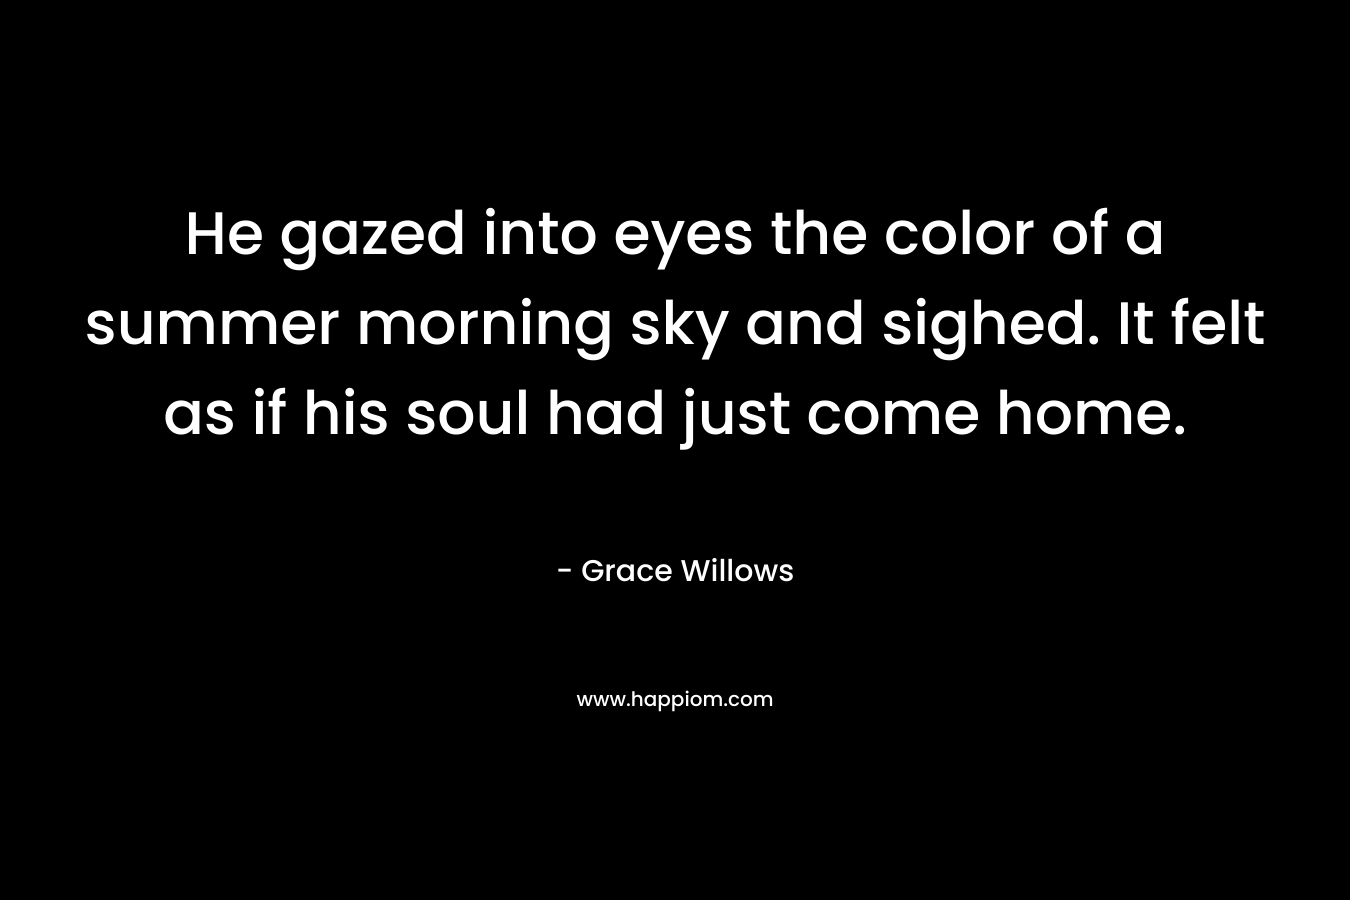 He gazed into eyes the color of a summer morning sky and sighed. It felt as if his soul had just come home.